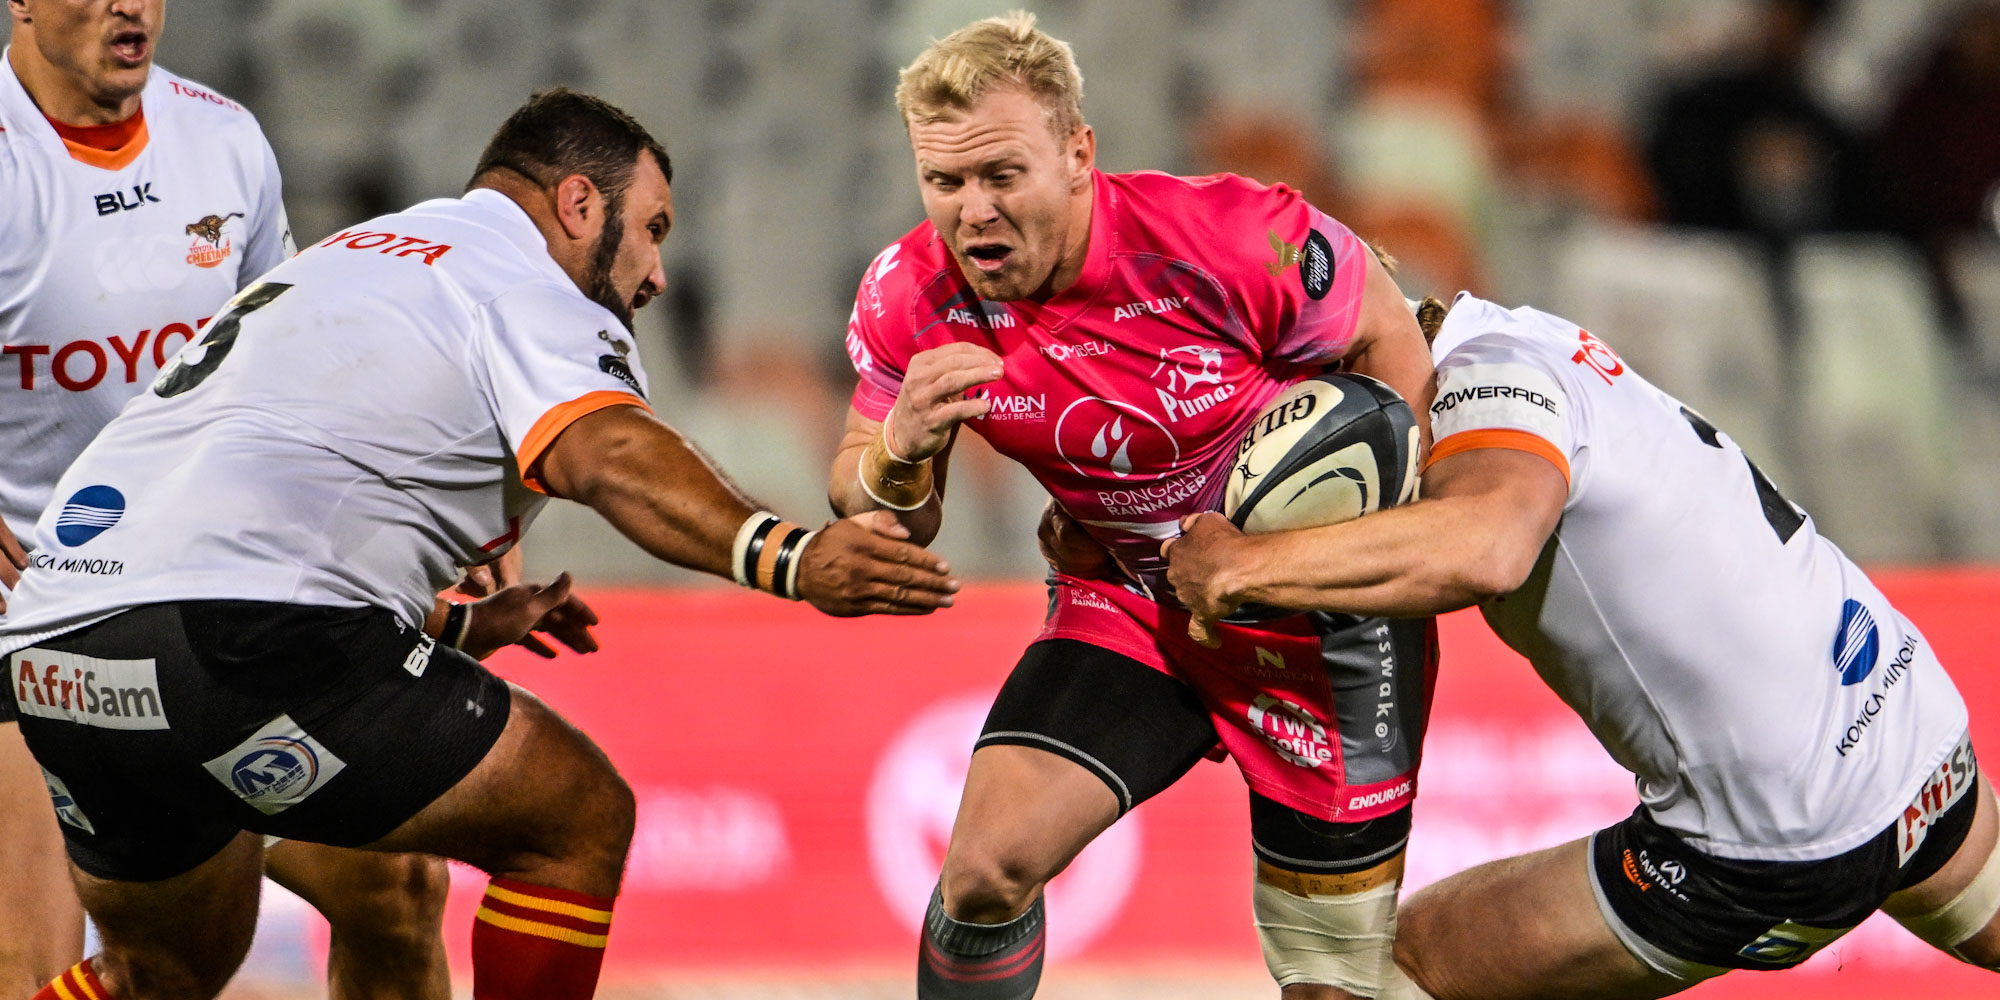 Tinus de Beer was in sublime form for the Airlink Pumas in their semi-final win over the Toyota Cheetahs.